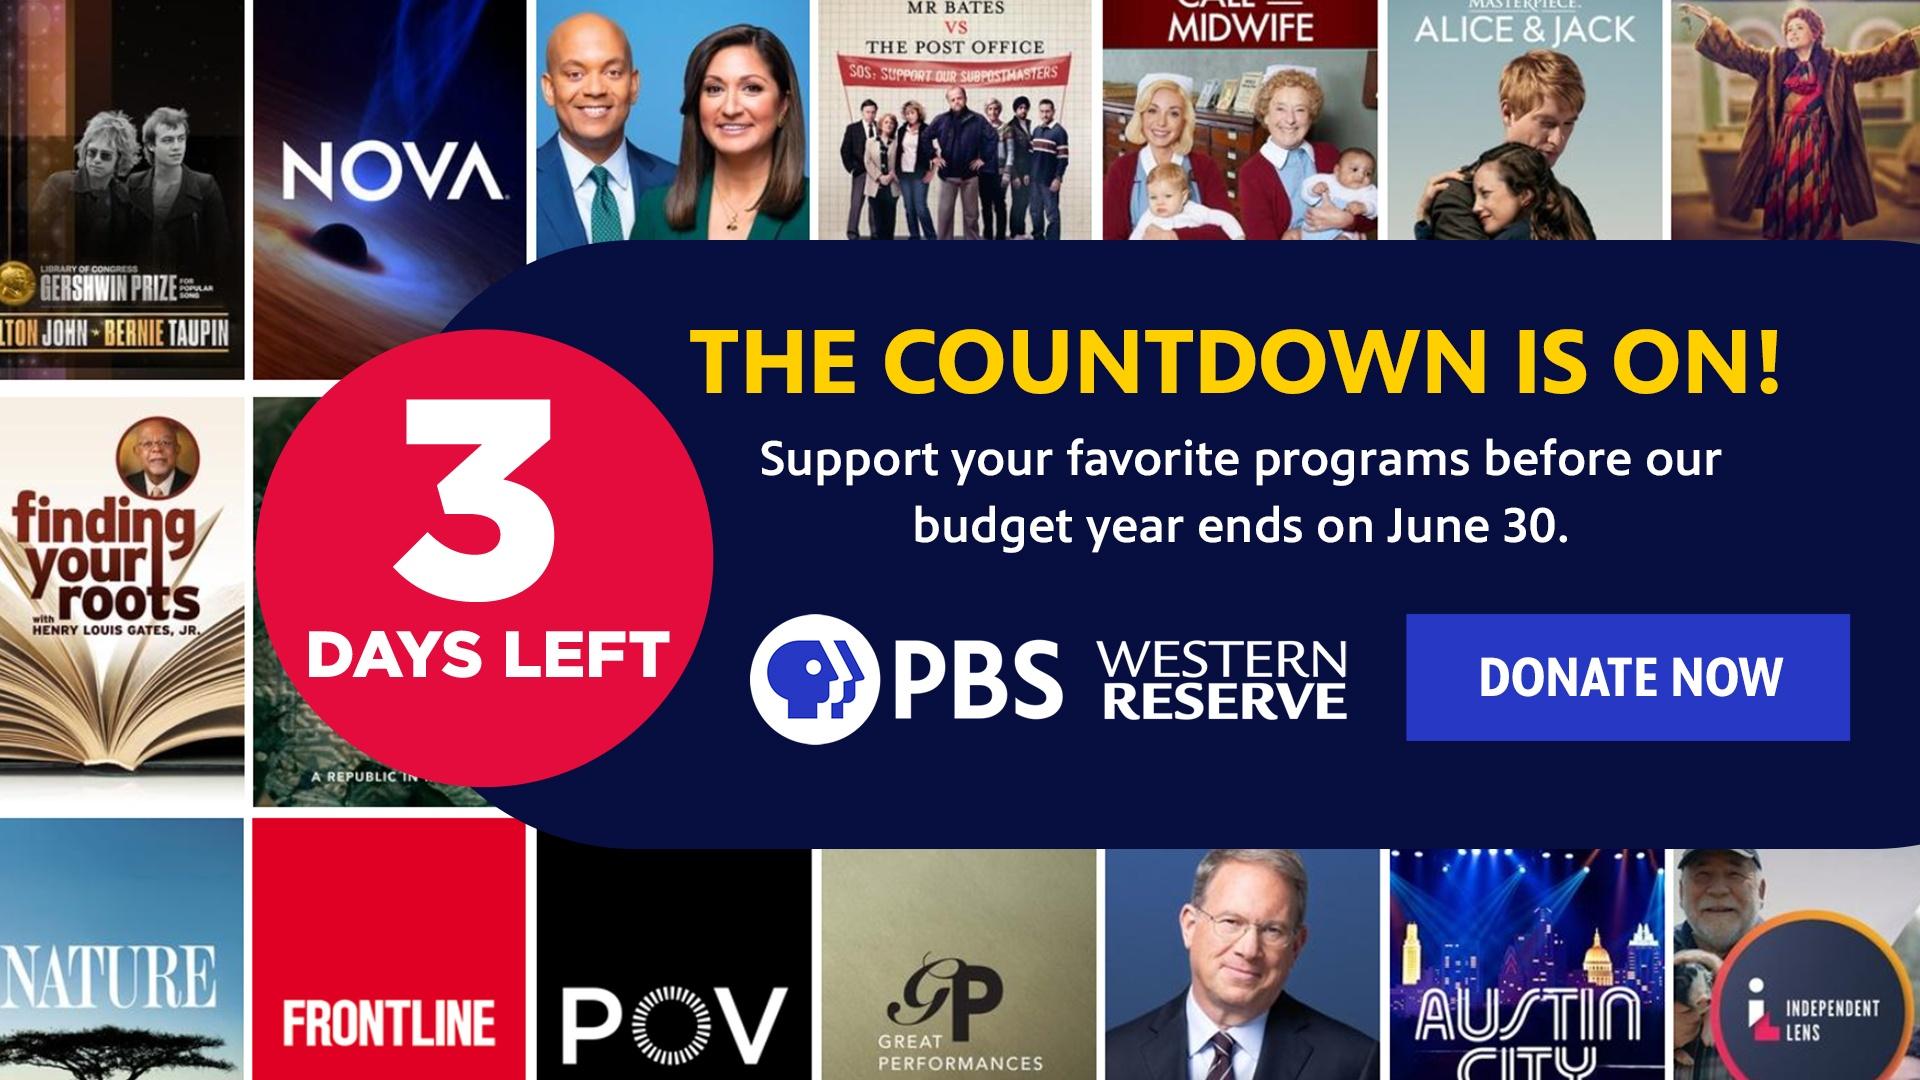 Support your favorite programs before our budget year ends on June 30.